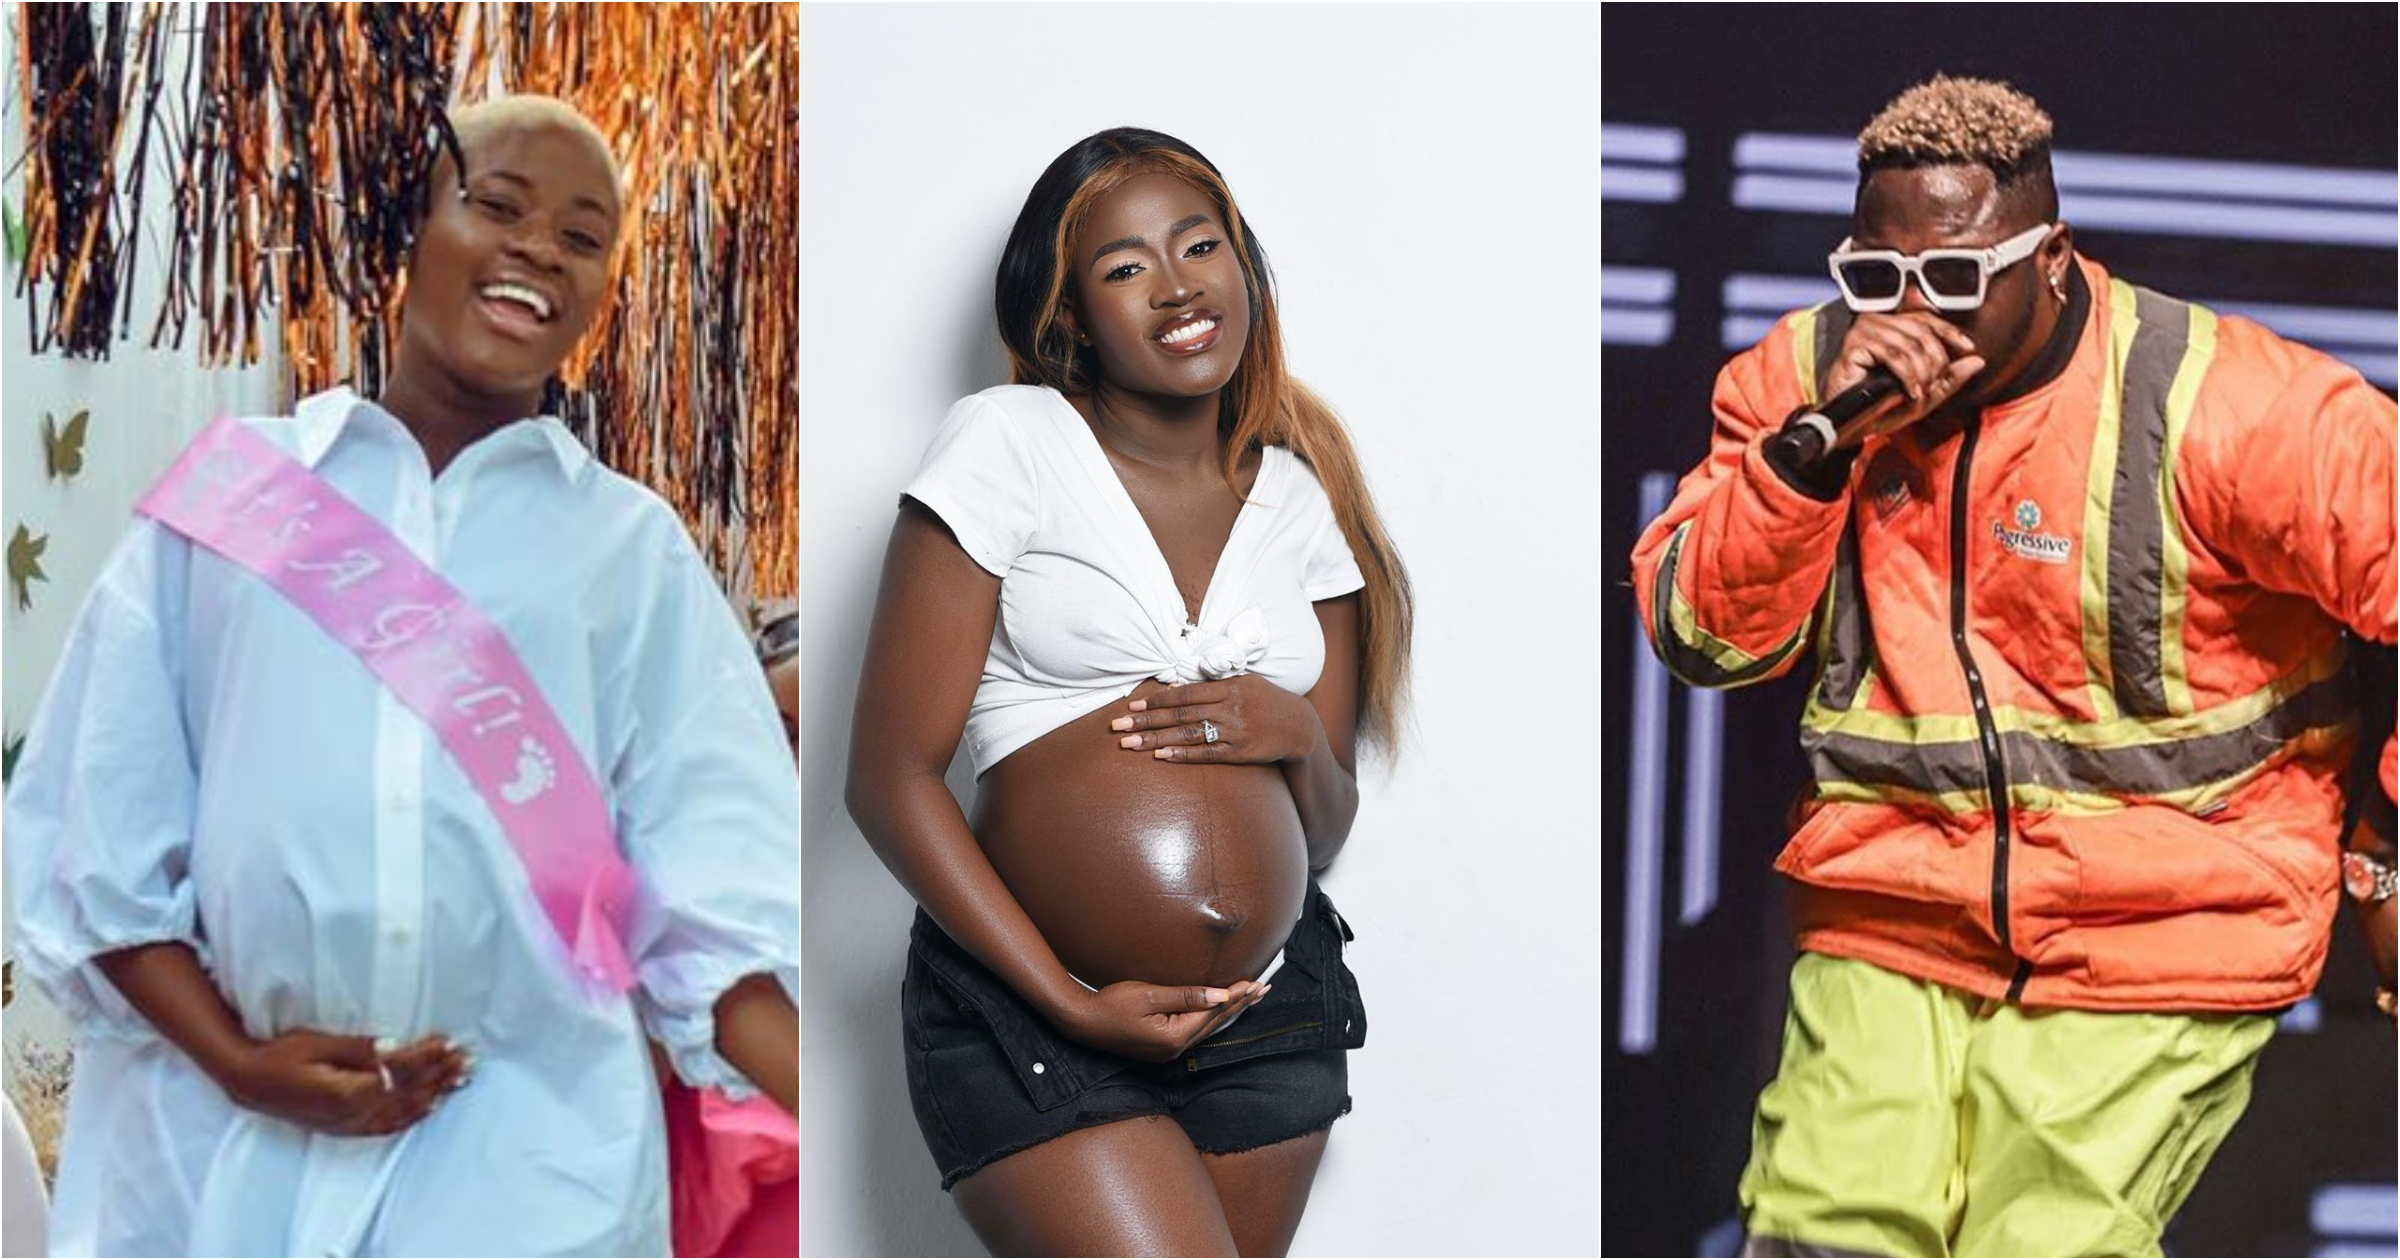 Medikal and Fella Makafui share 1st photos of their daughter; reveal name as Island